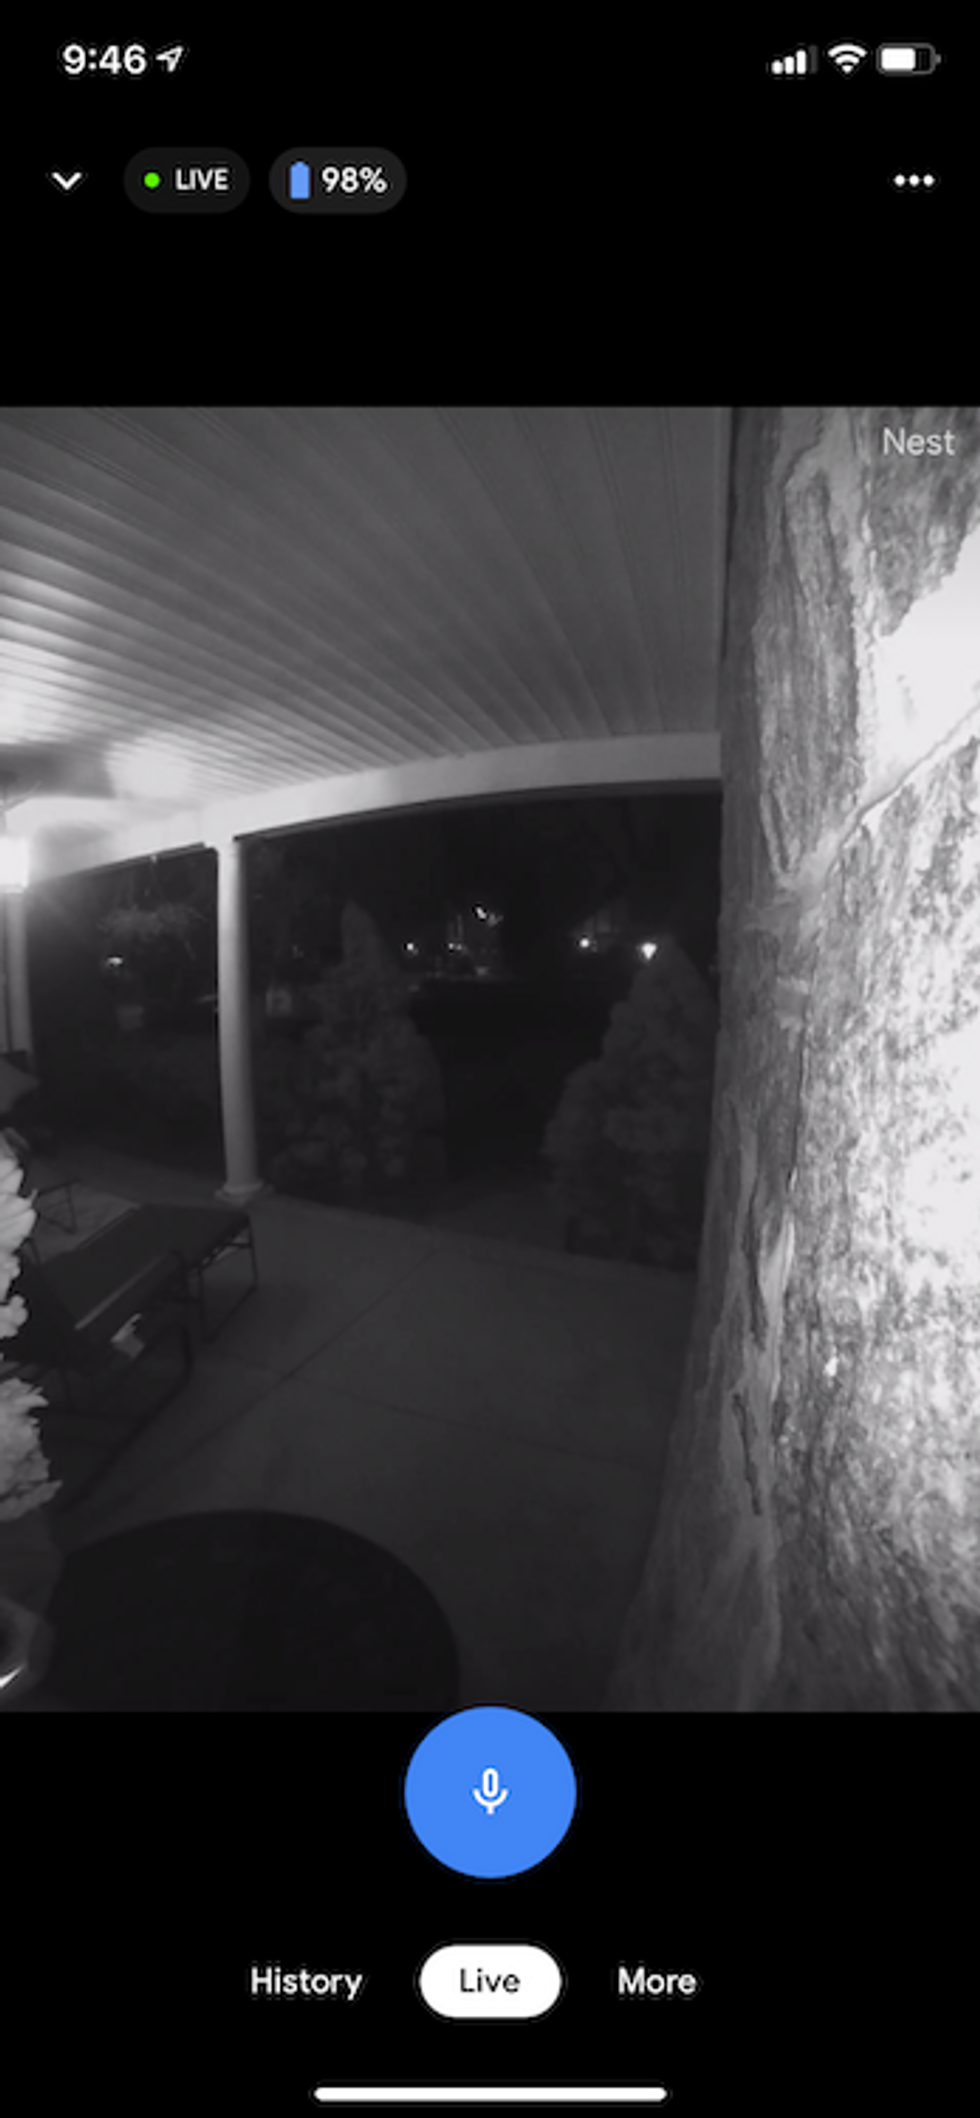 Night time view from Nest Doorbell in app